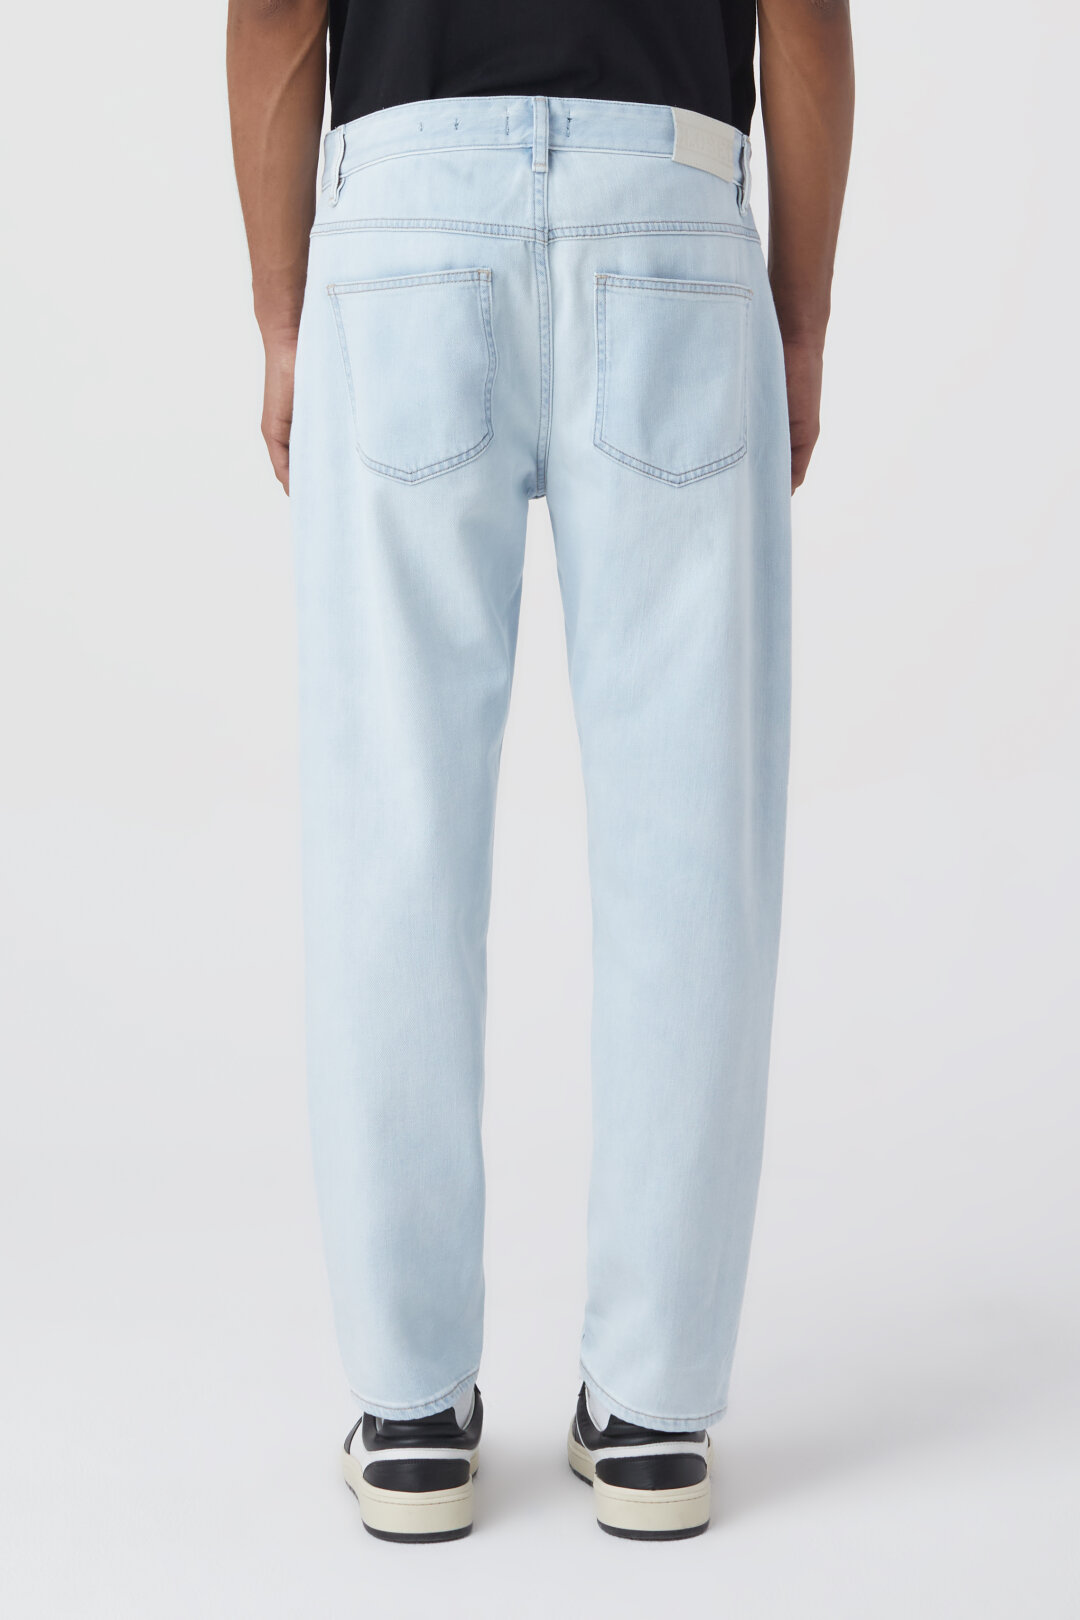 CLOSED Cooper Tapered Jeans in Light Blue